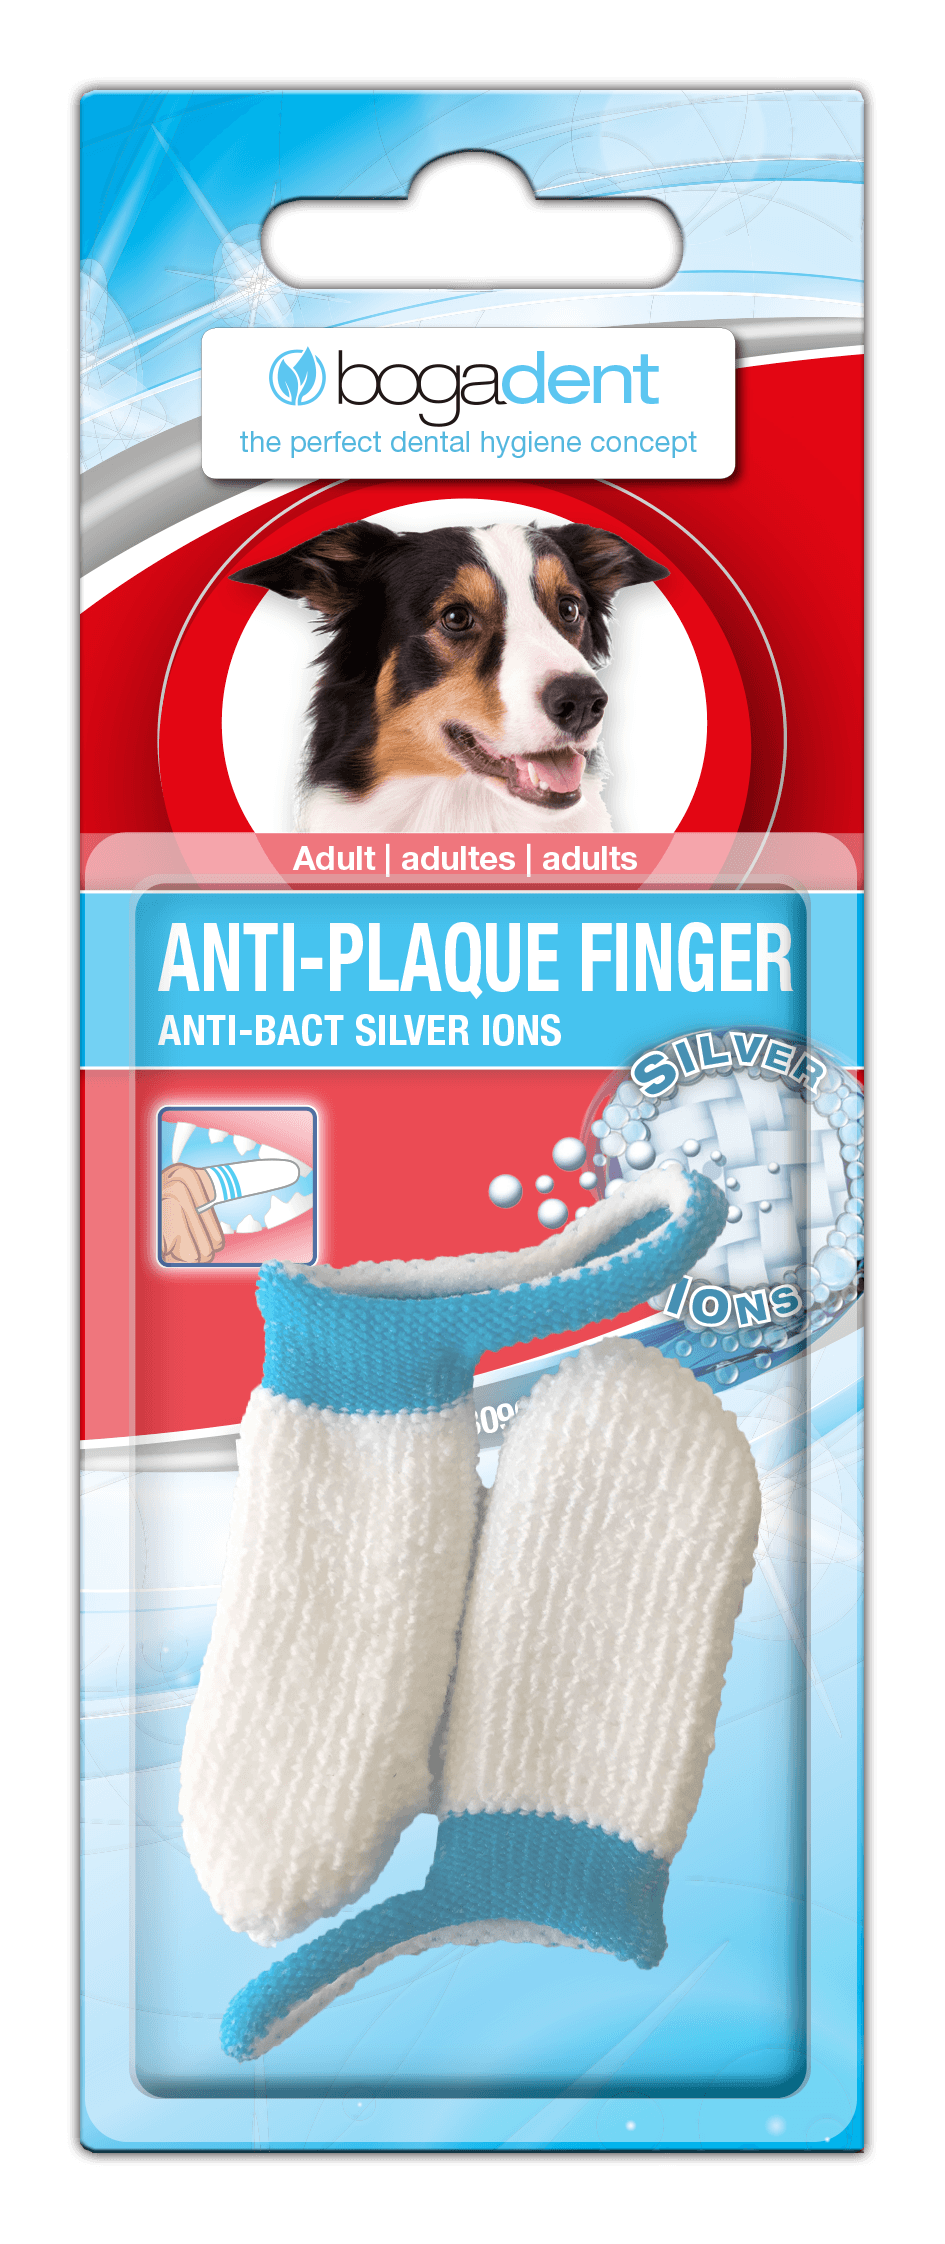 Bogadent - Anti-Plaque - silver ion technology - finger Dog 2pc - (UBO0704)